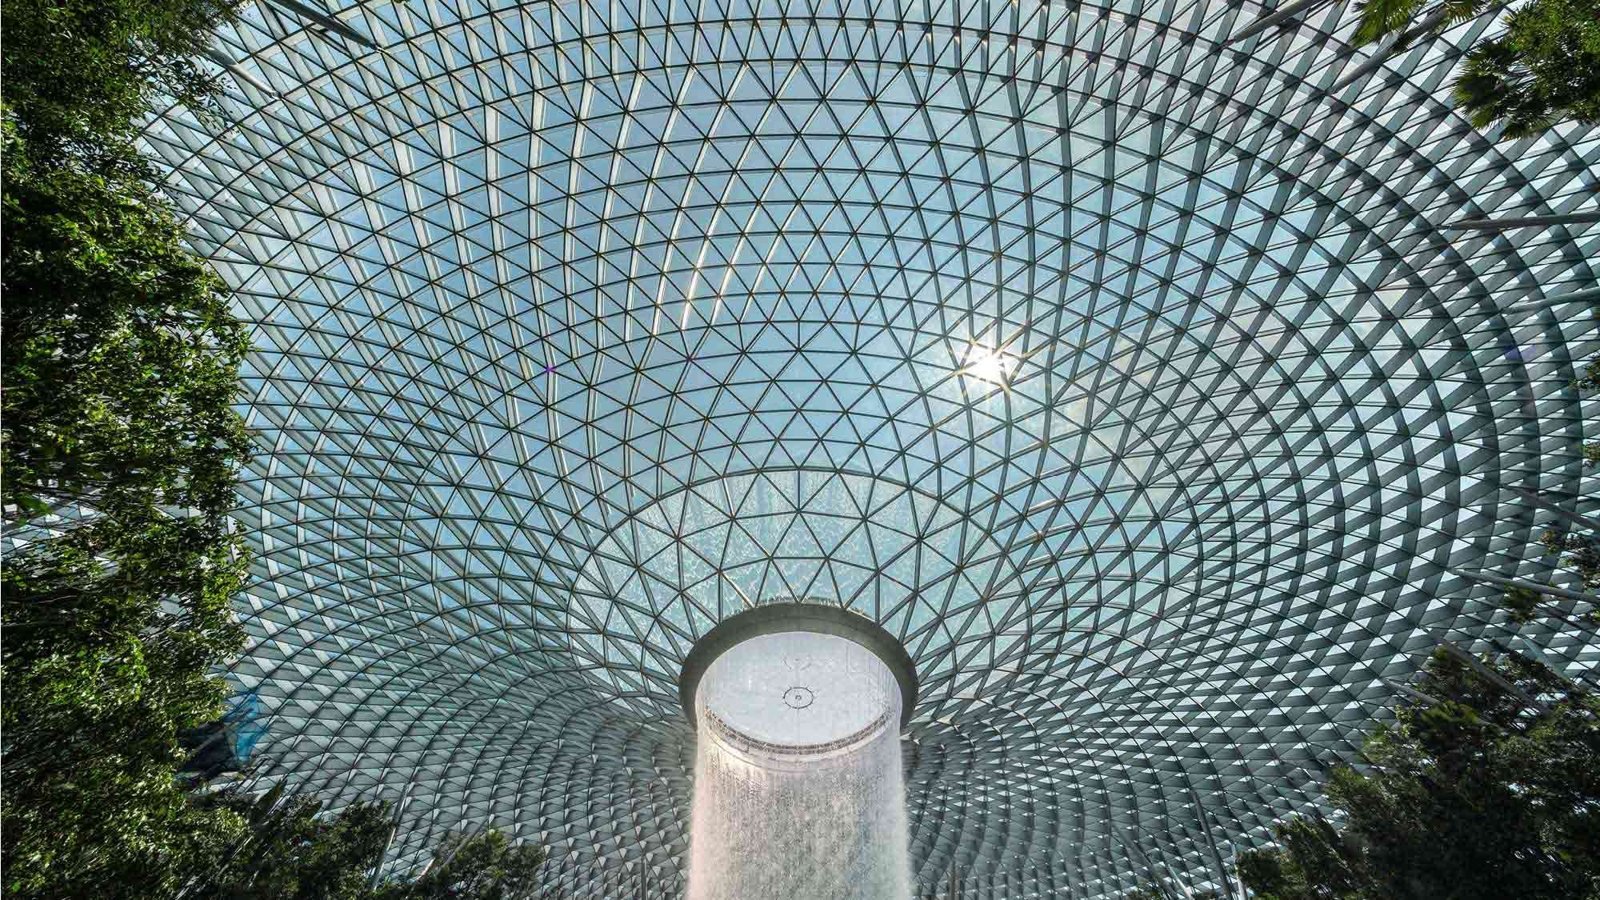 Roof of Jewel Changi showing its distinctive facade